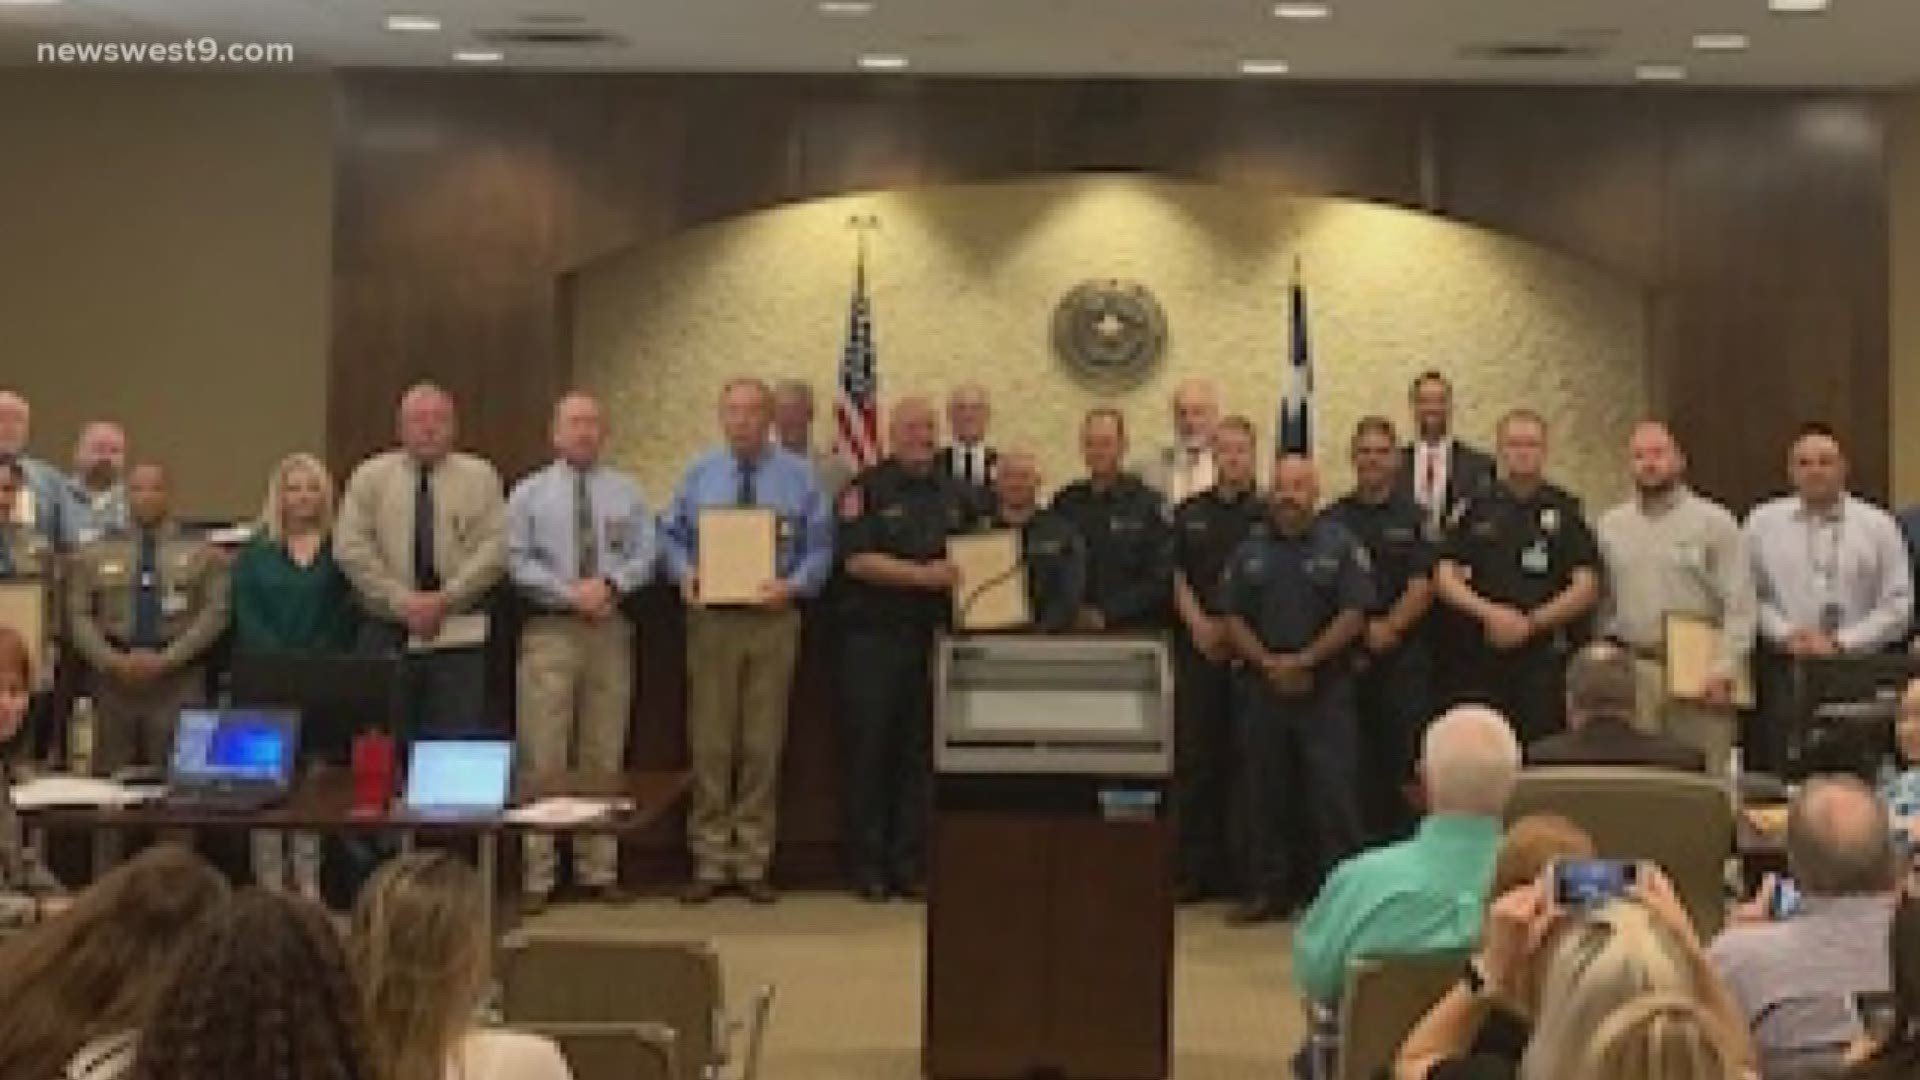 County commissioners signed a resolution honoring those who risked their lives during the August 31 shooting.